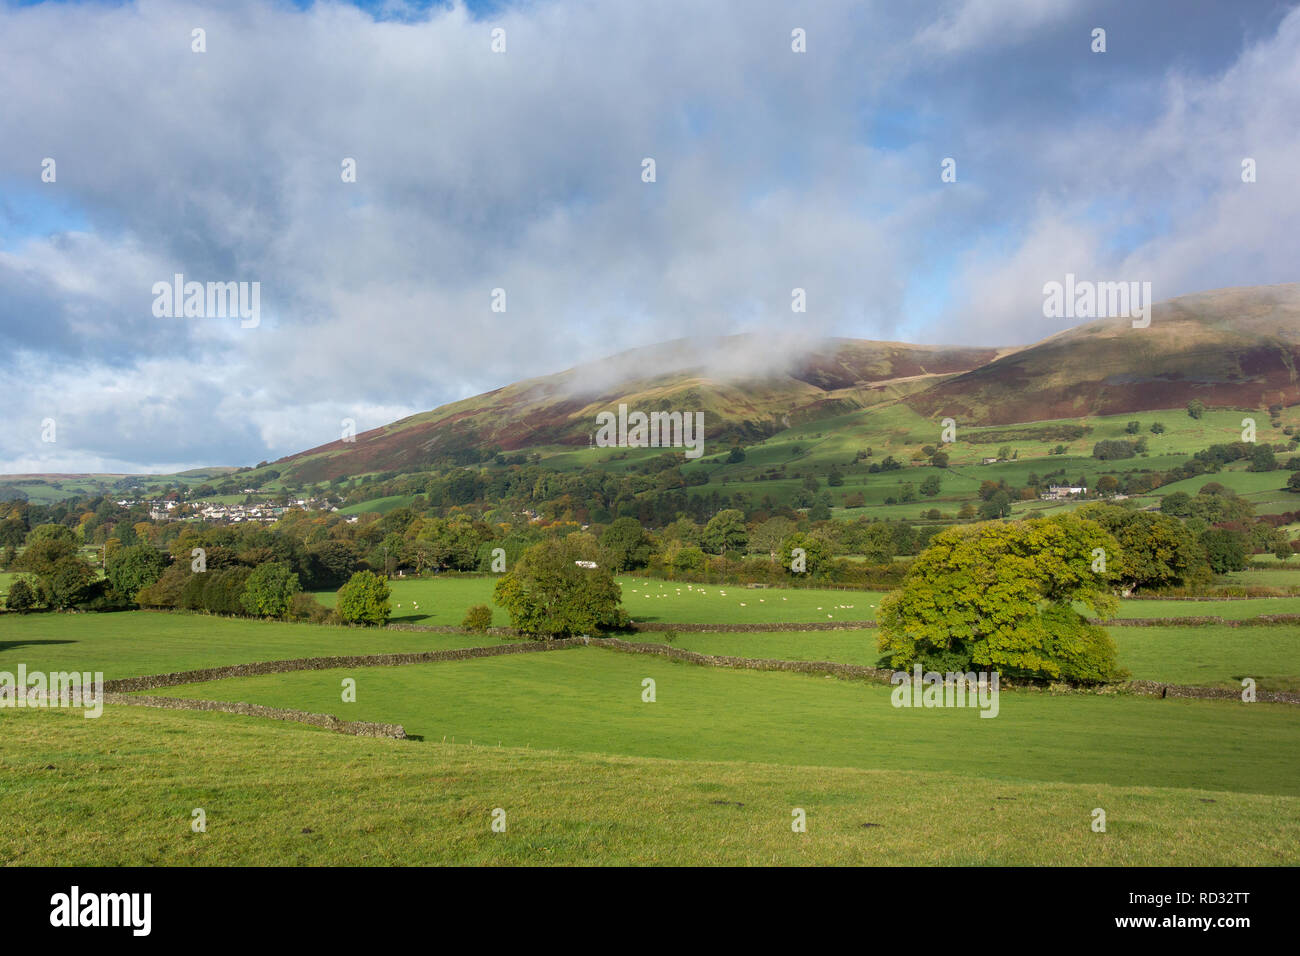 Autumnal day near Sedbergh, Cumbria, ooking onto the Howgill Fells. Yorkshire Dales, UK. Stock Photo